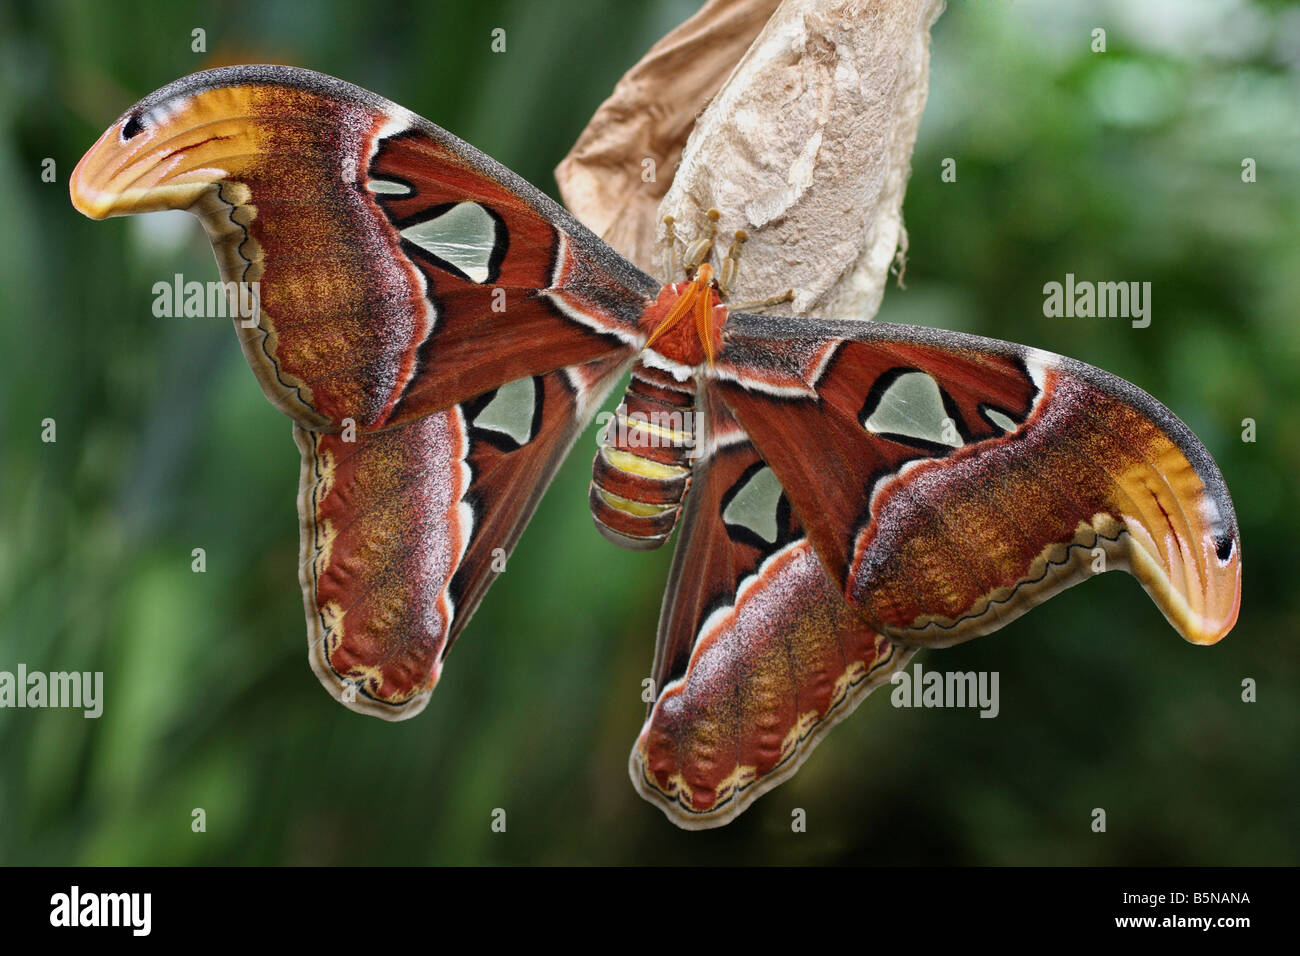 An Atlas Moth, the largest known moth species in the world. Stock Photo